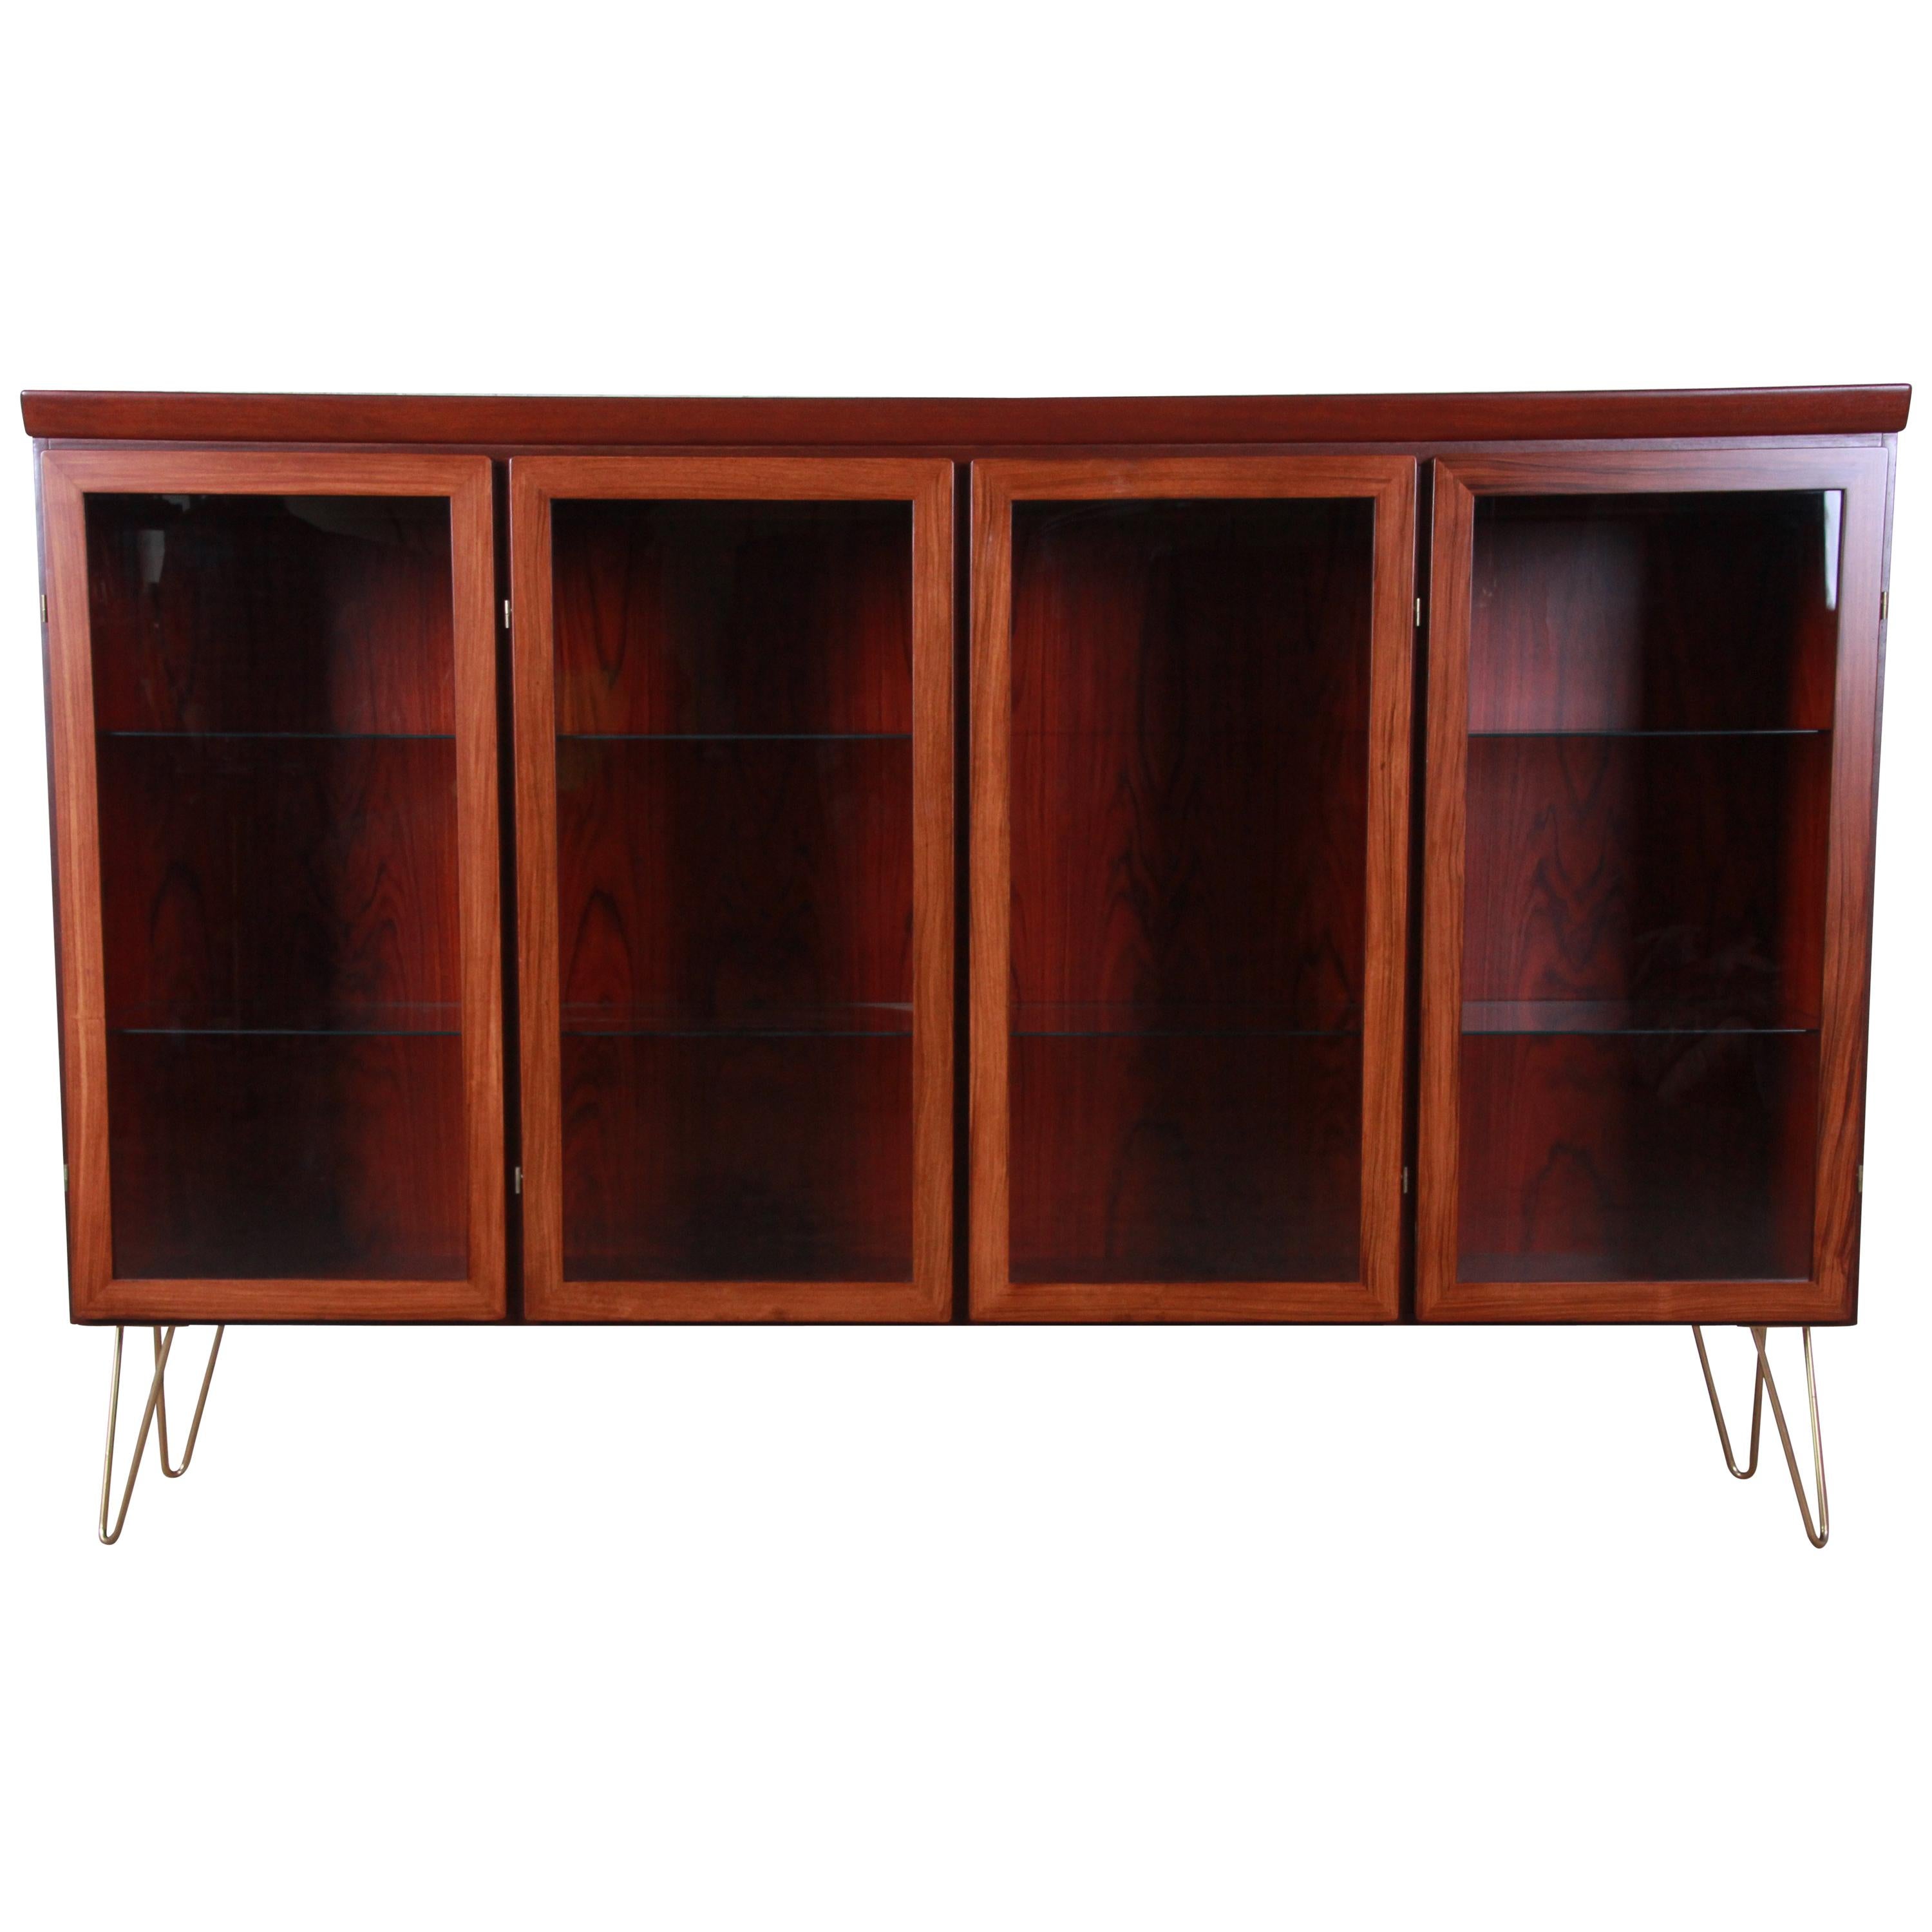 Skovby Danish Modern Rosewood Glass Front Bookcase on Hairpin Legs